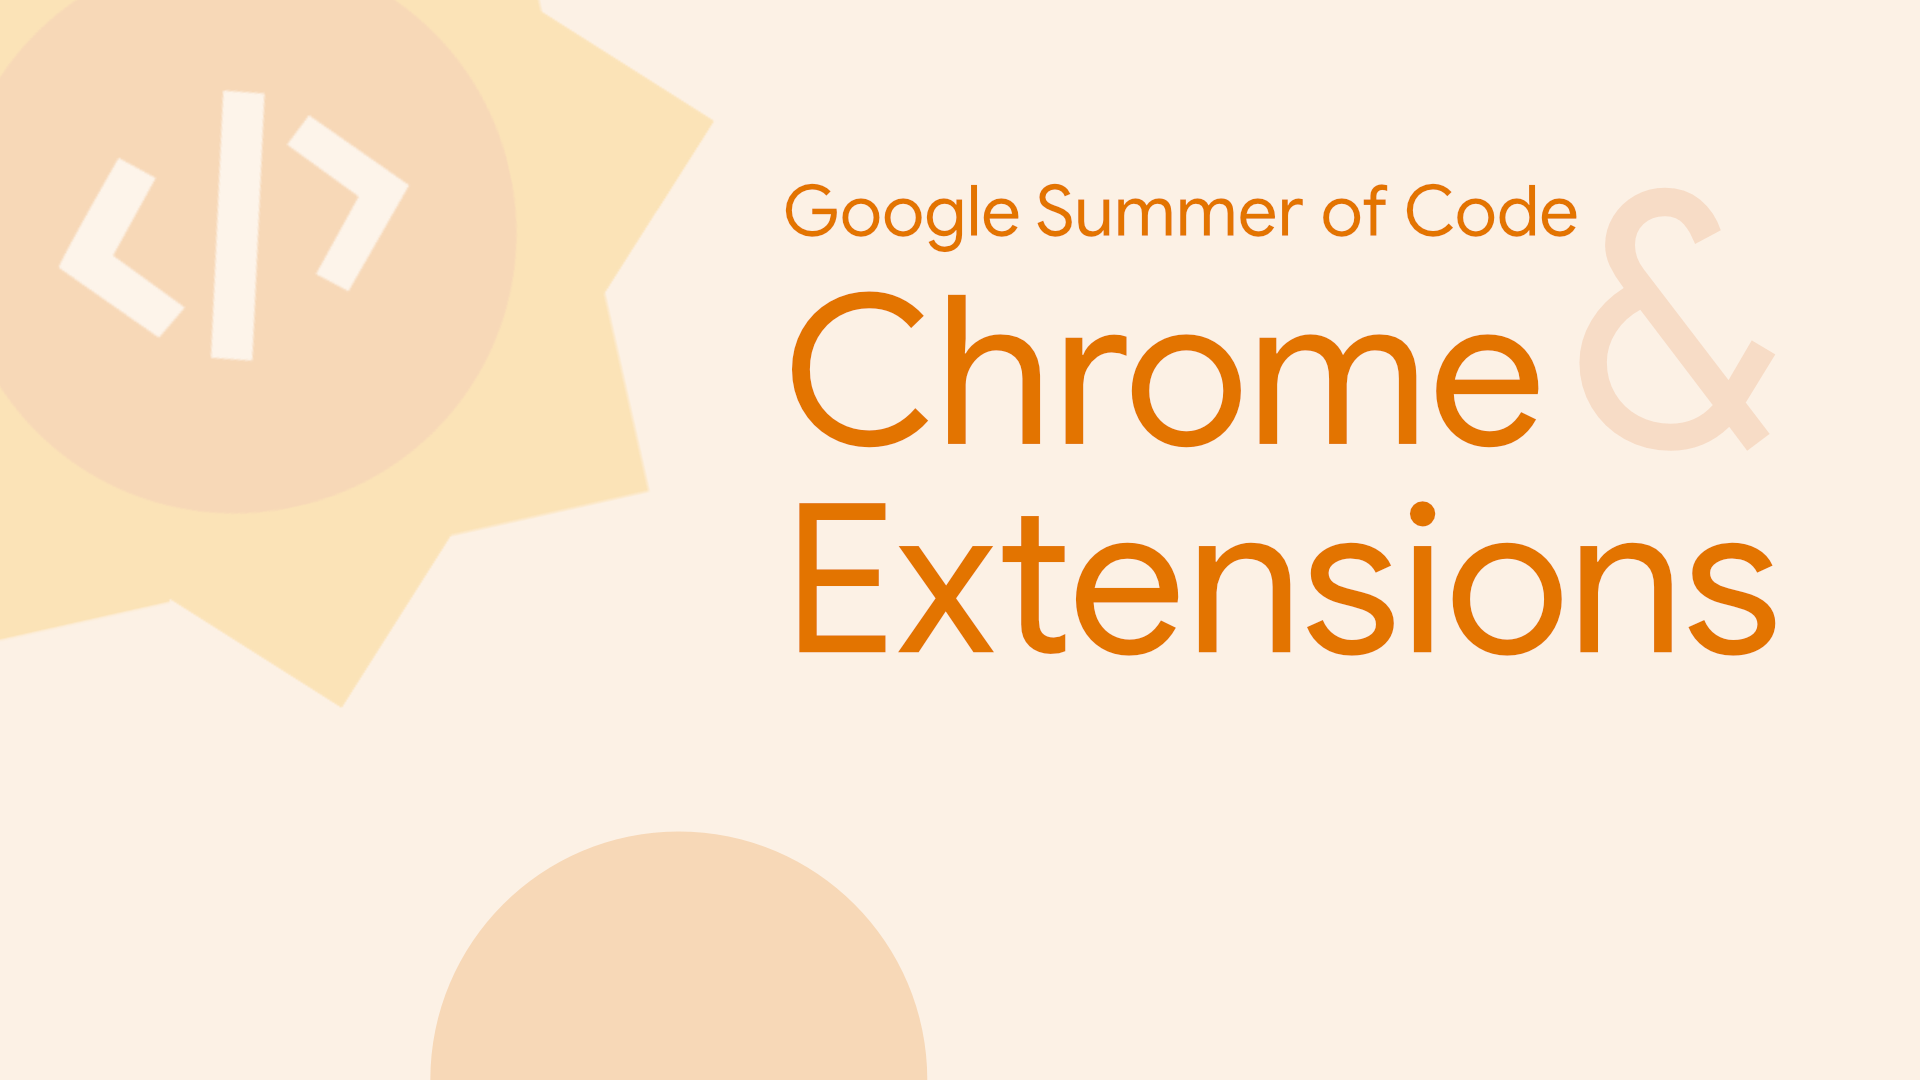 Google Summer of Code & Chrome Extensions